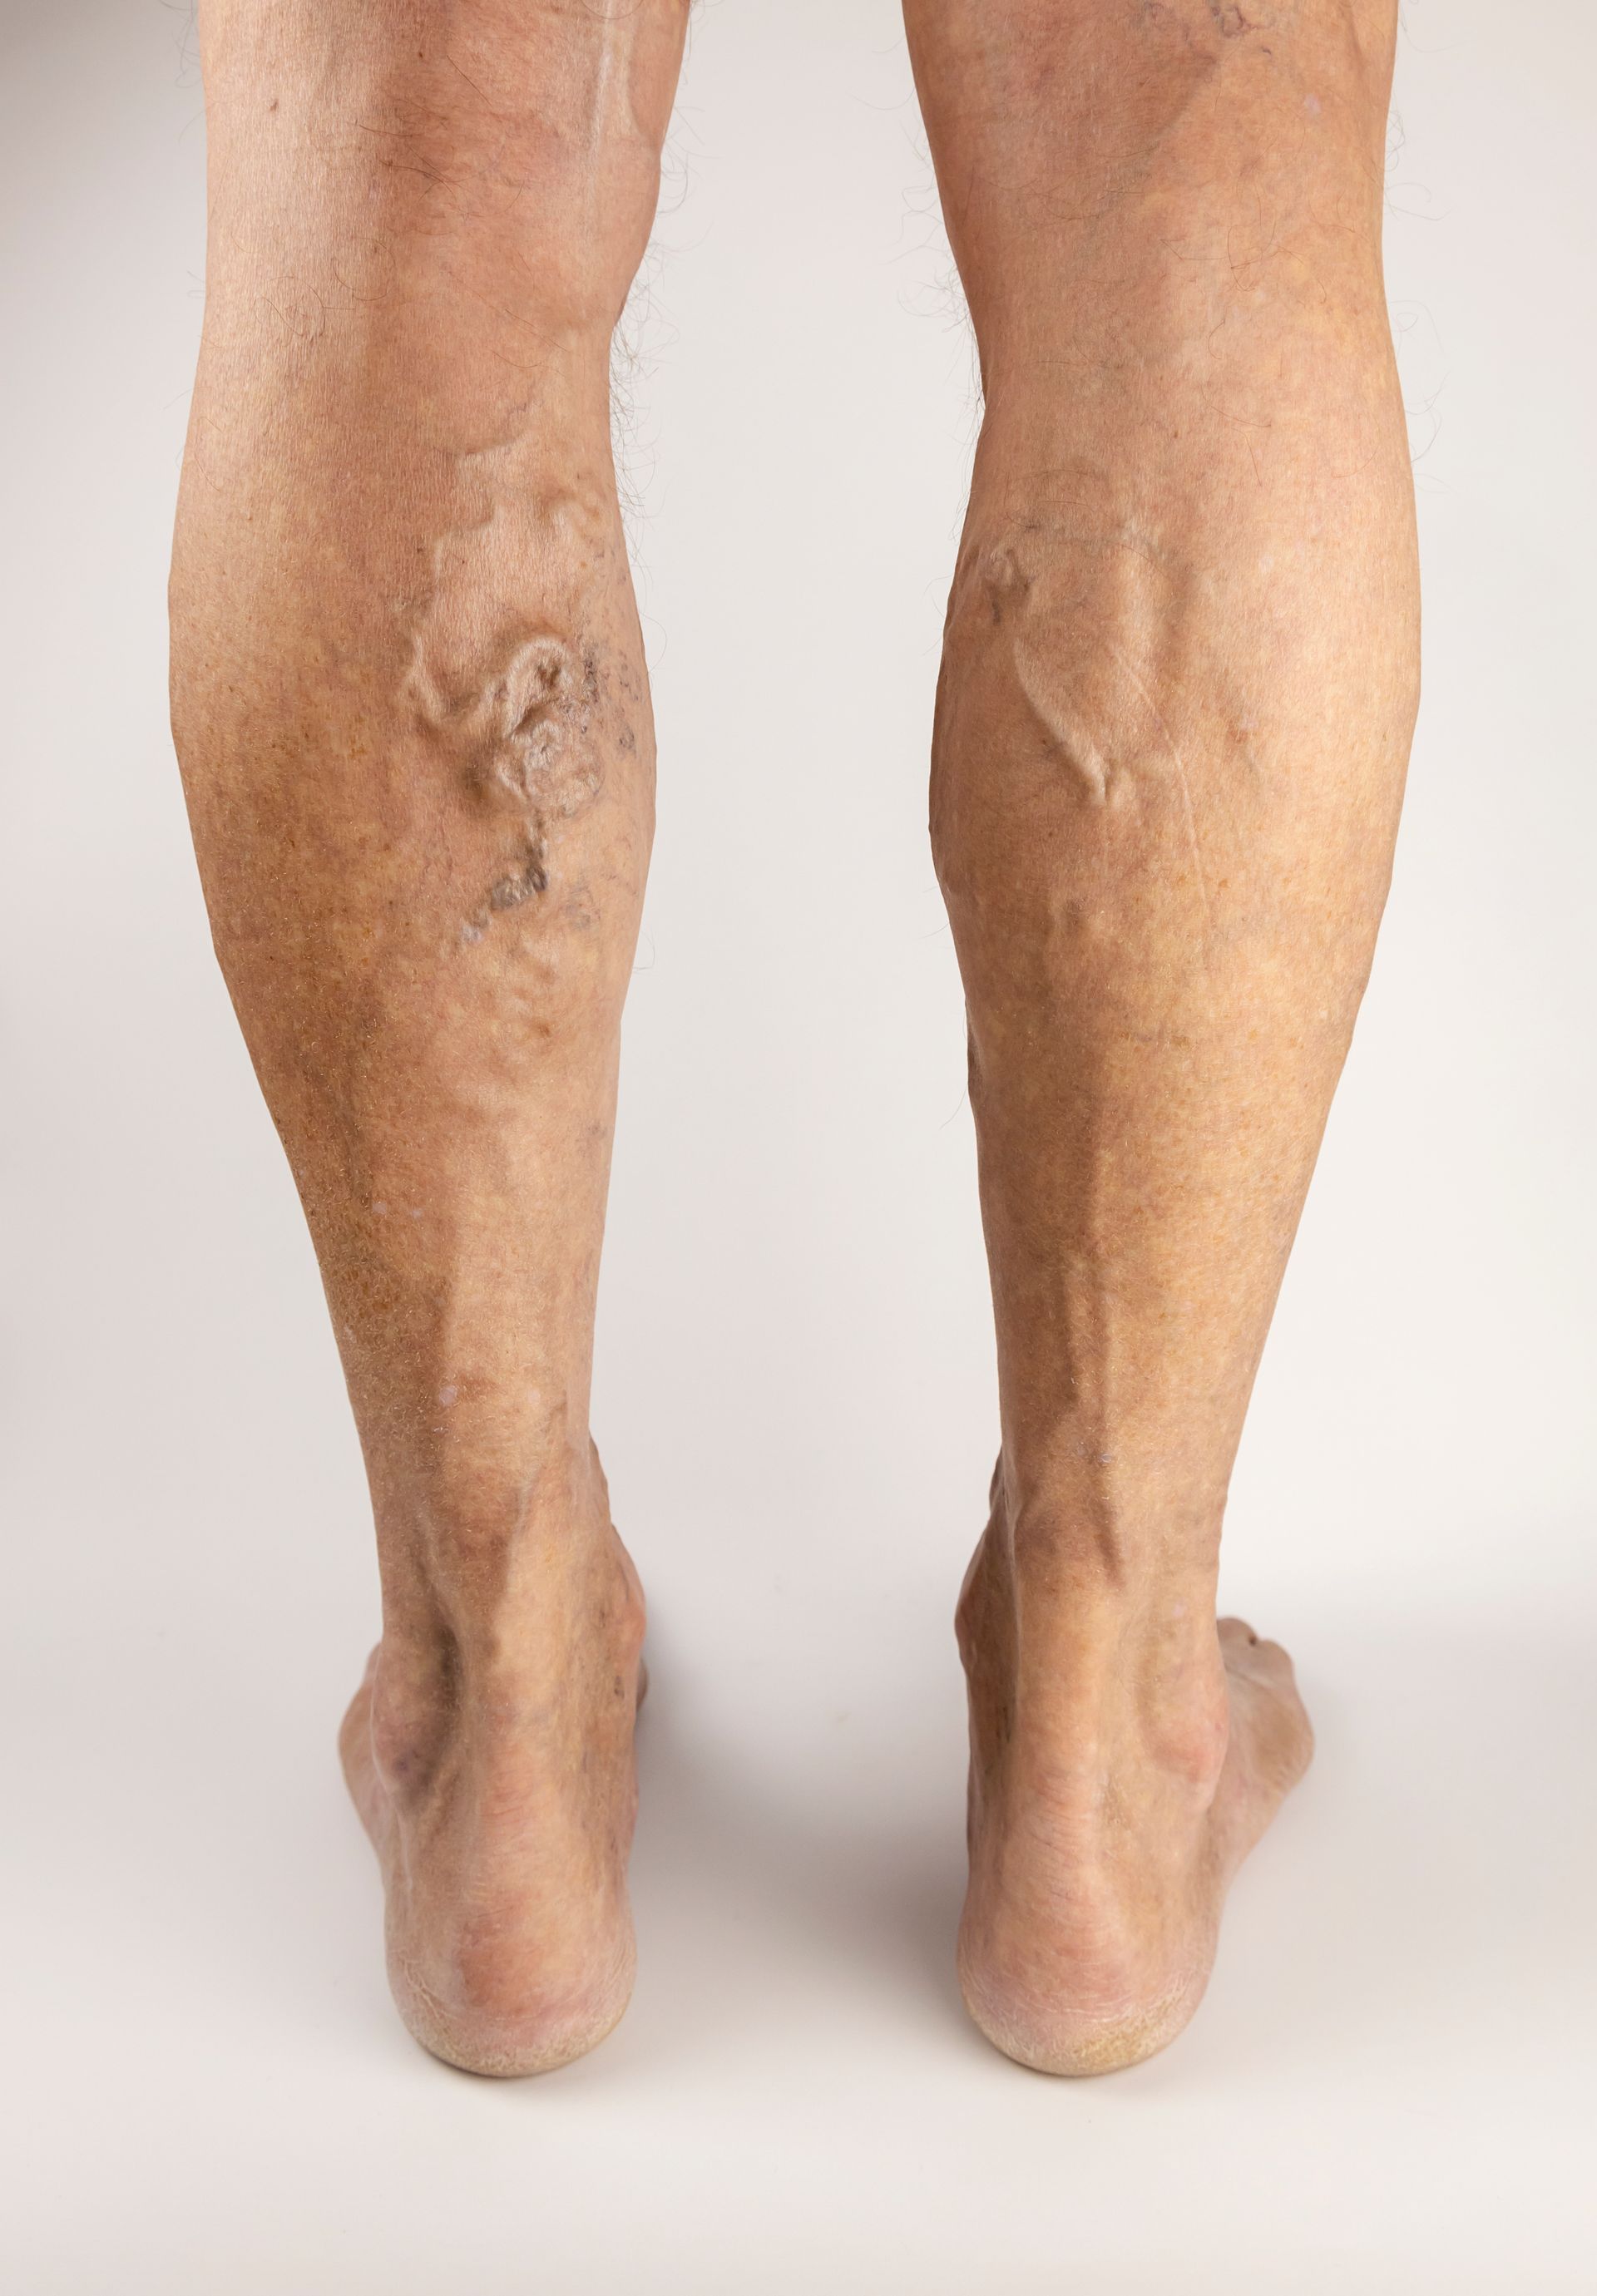 a close up of a person 's legs with varicose veins